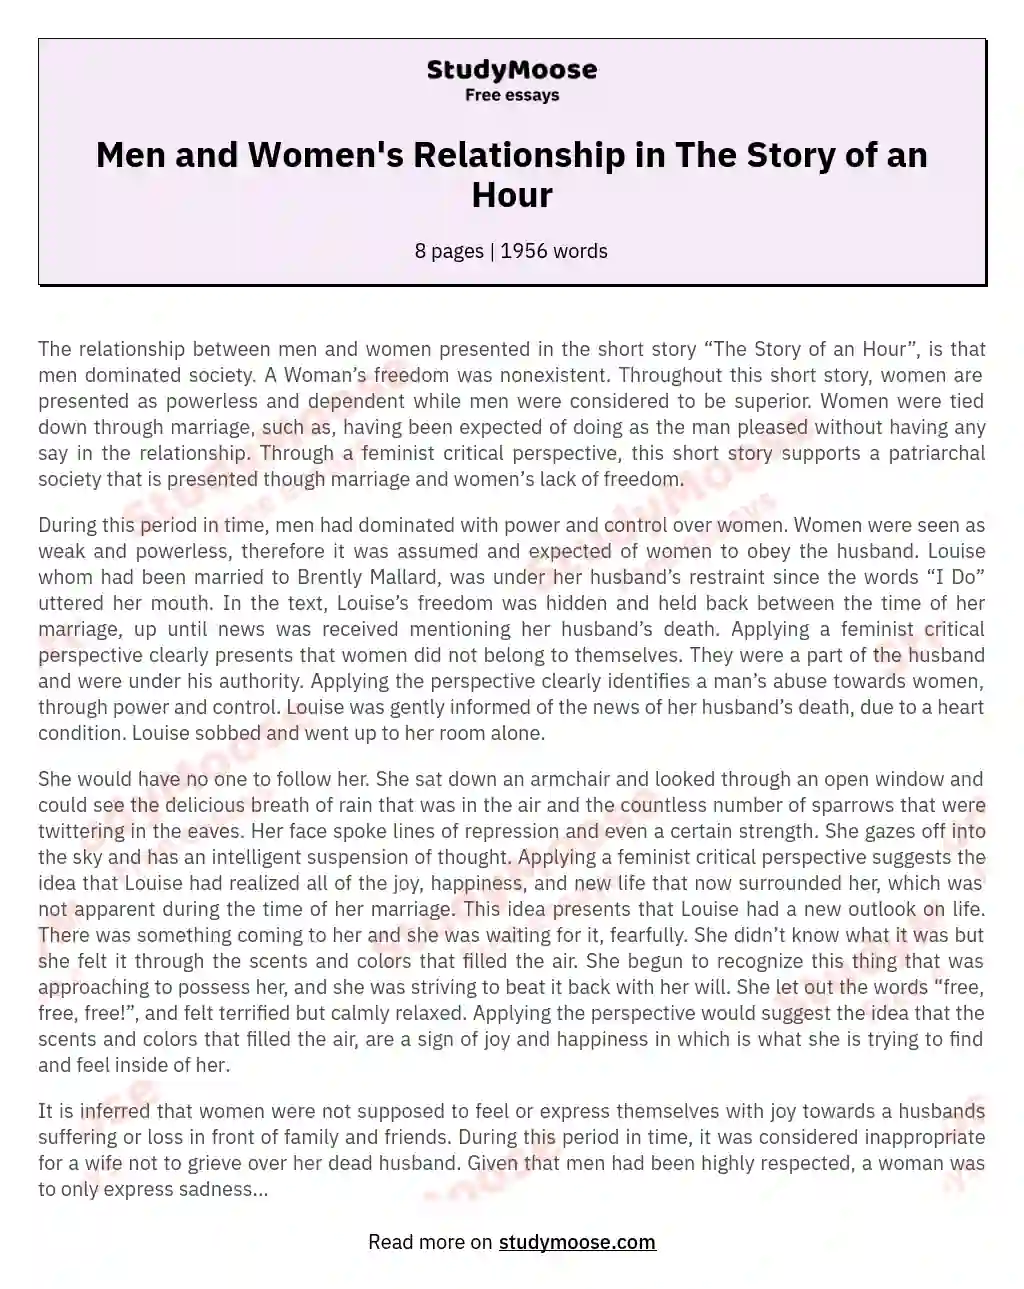 The Relationship Between Men and Women Presented in the Short Story “the Story of an Hour”